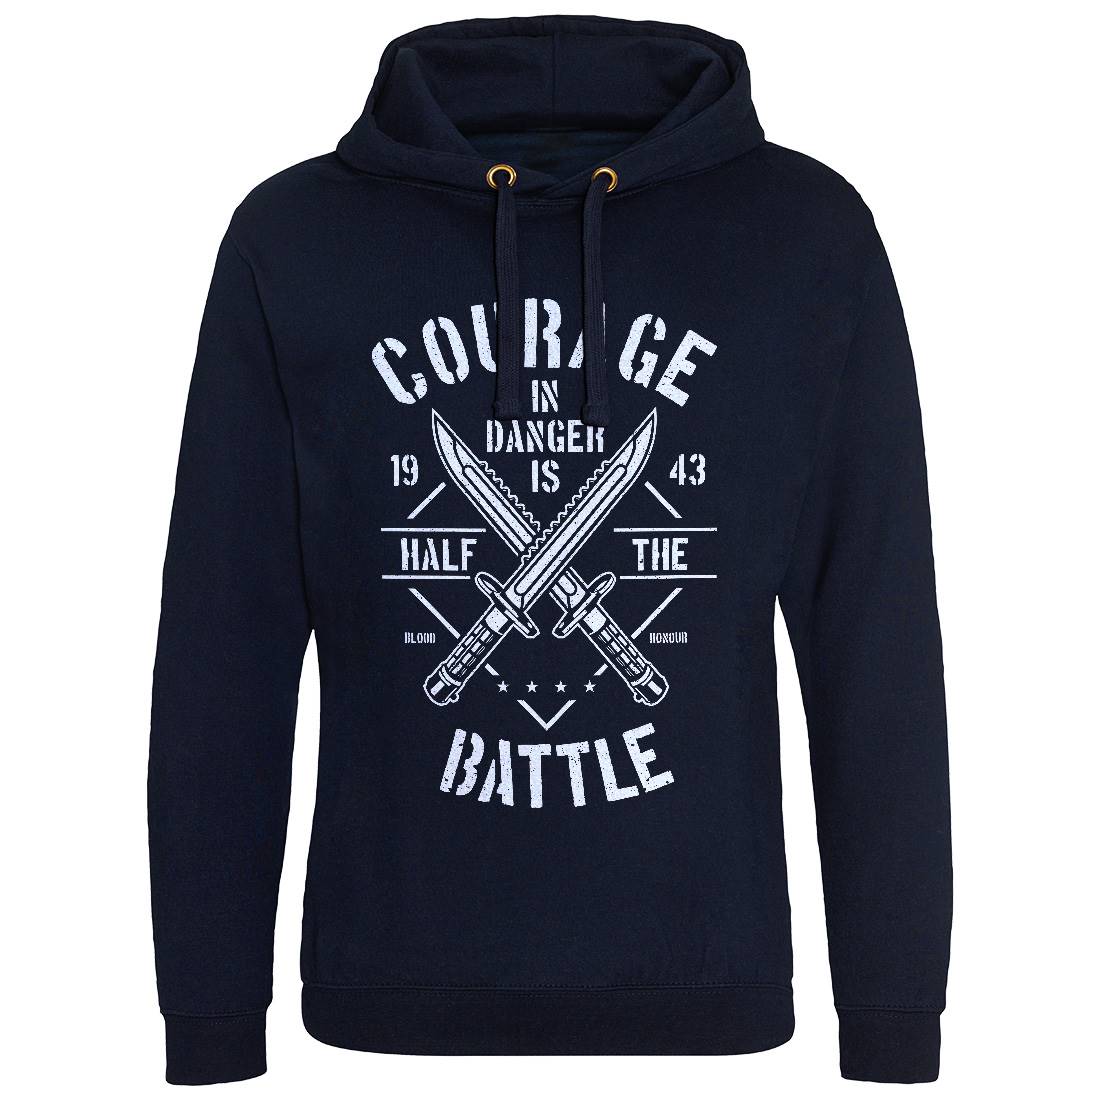 Courage In Danger Mens Hoodie Without Pocket Army A639